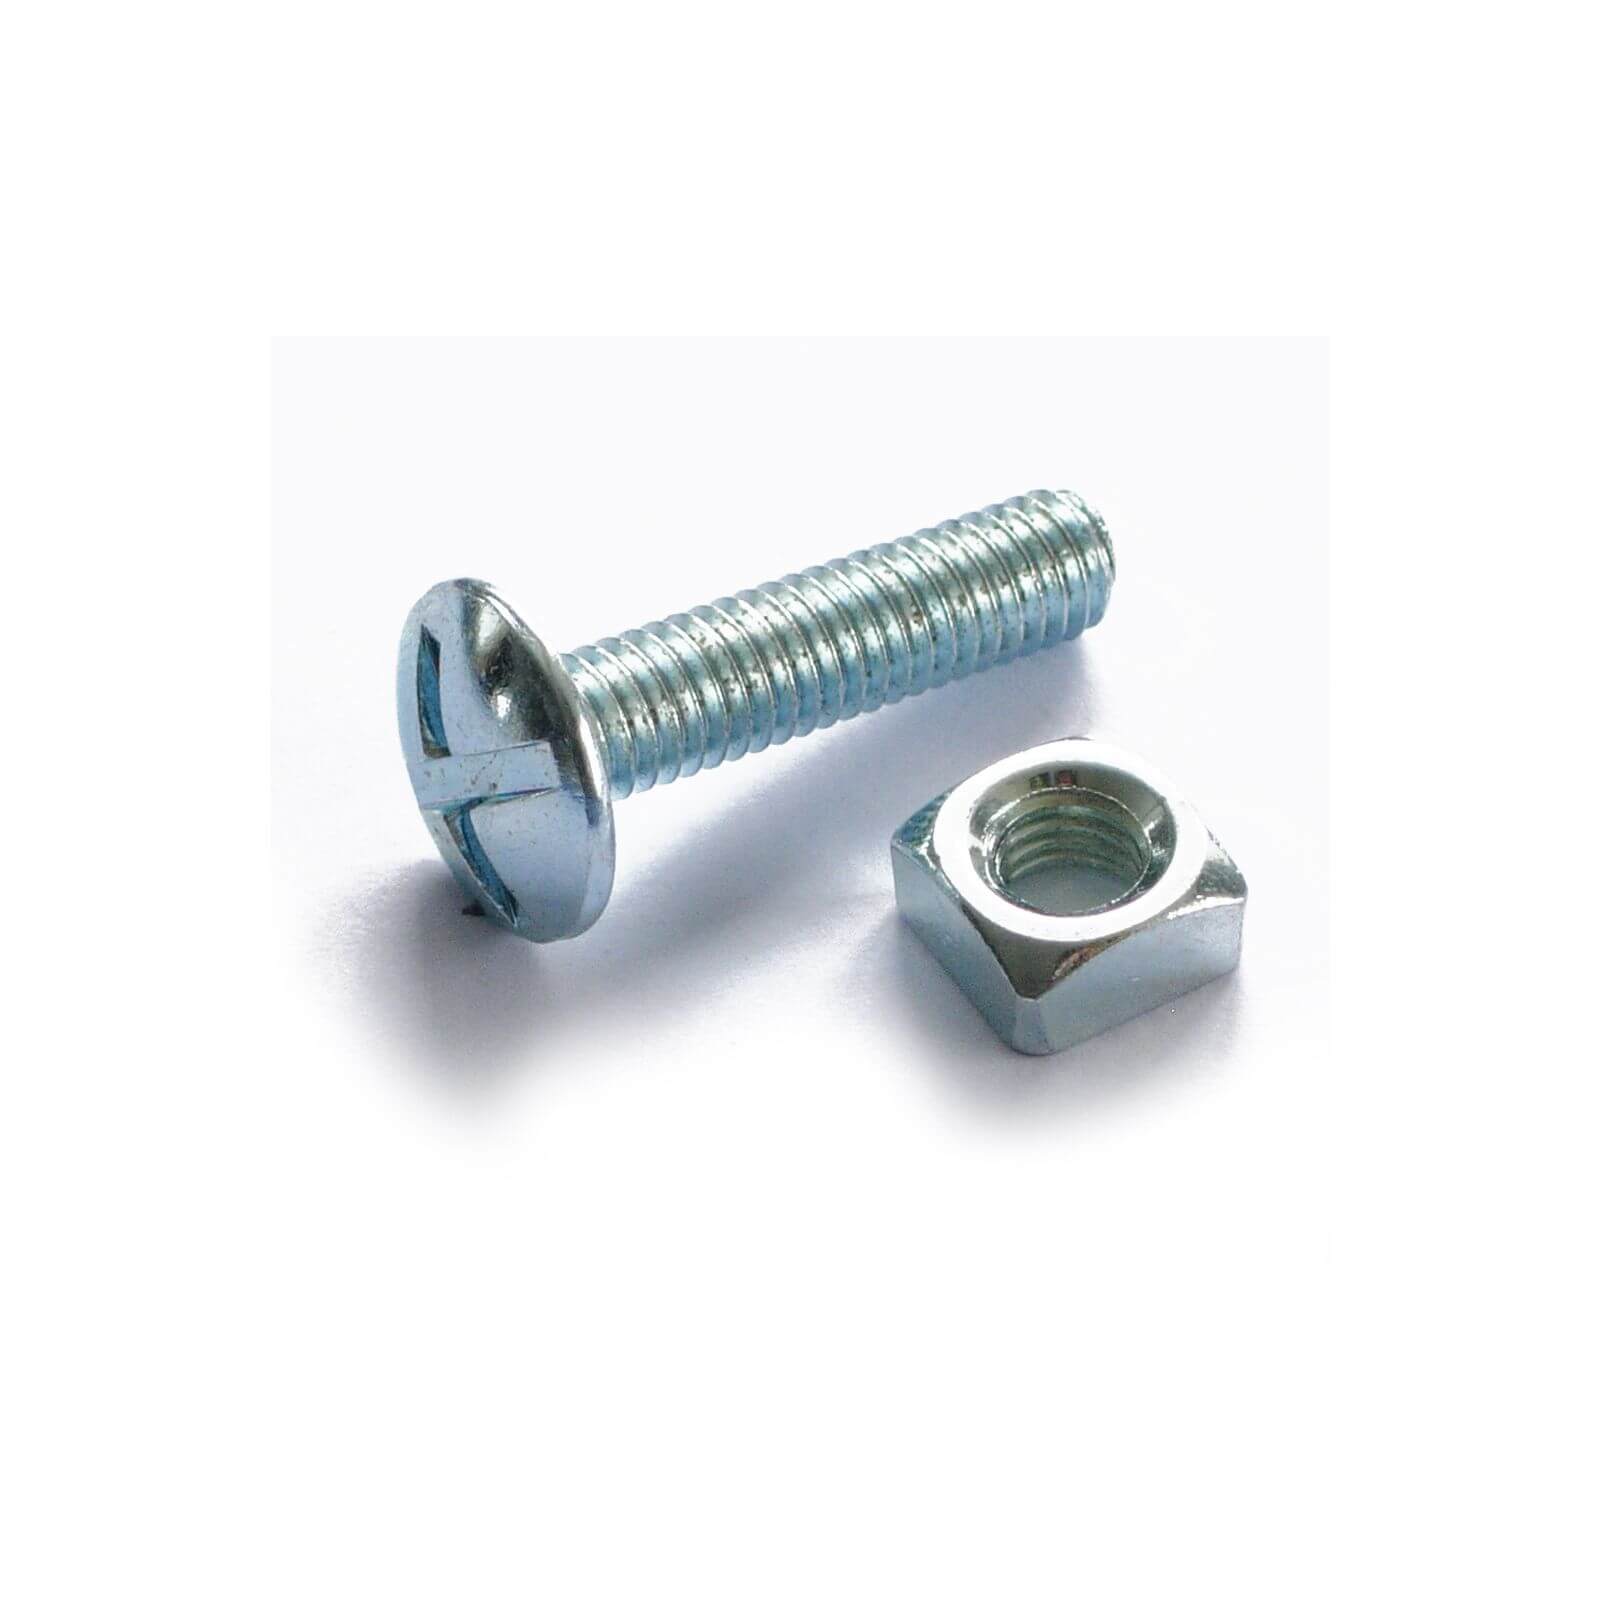 Roofing Bolt - Bright Zinc Plated - M6 40mm - 10 Pack